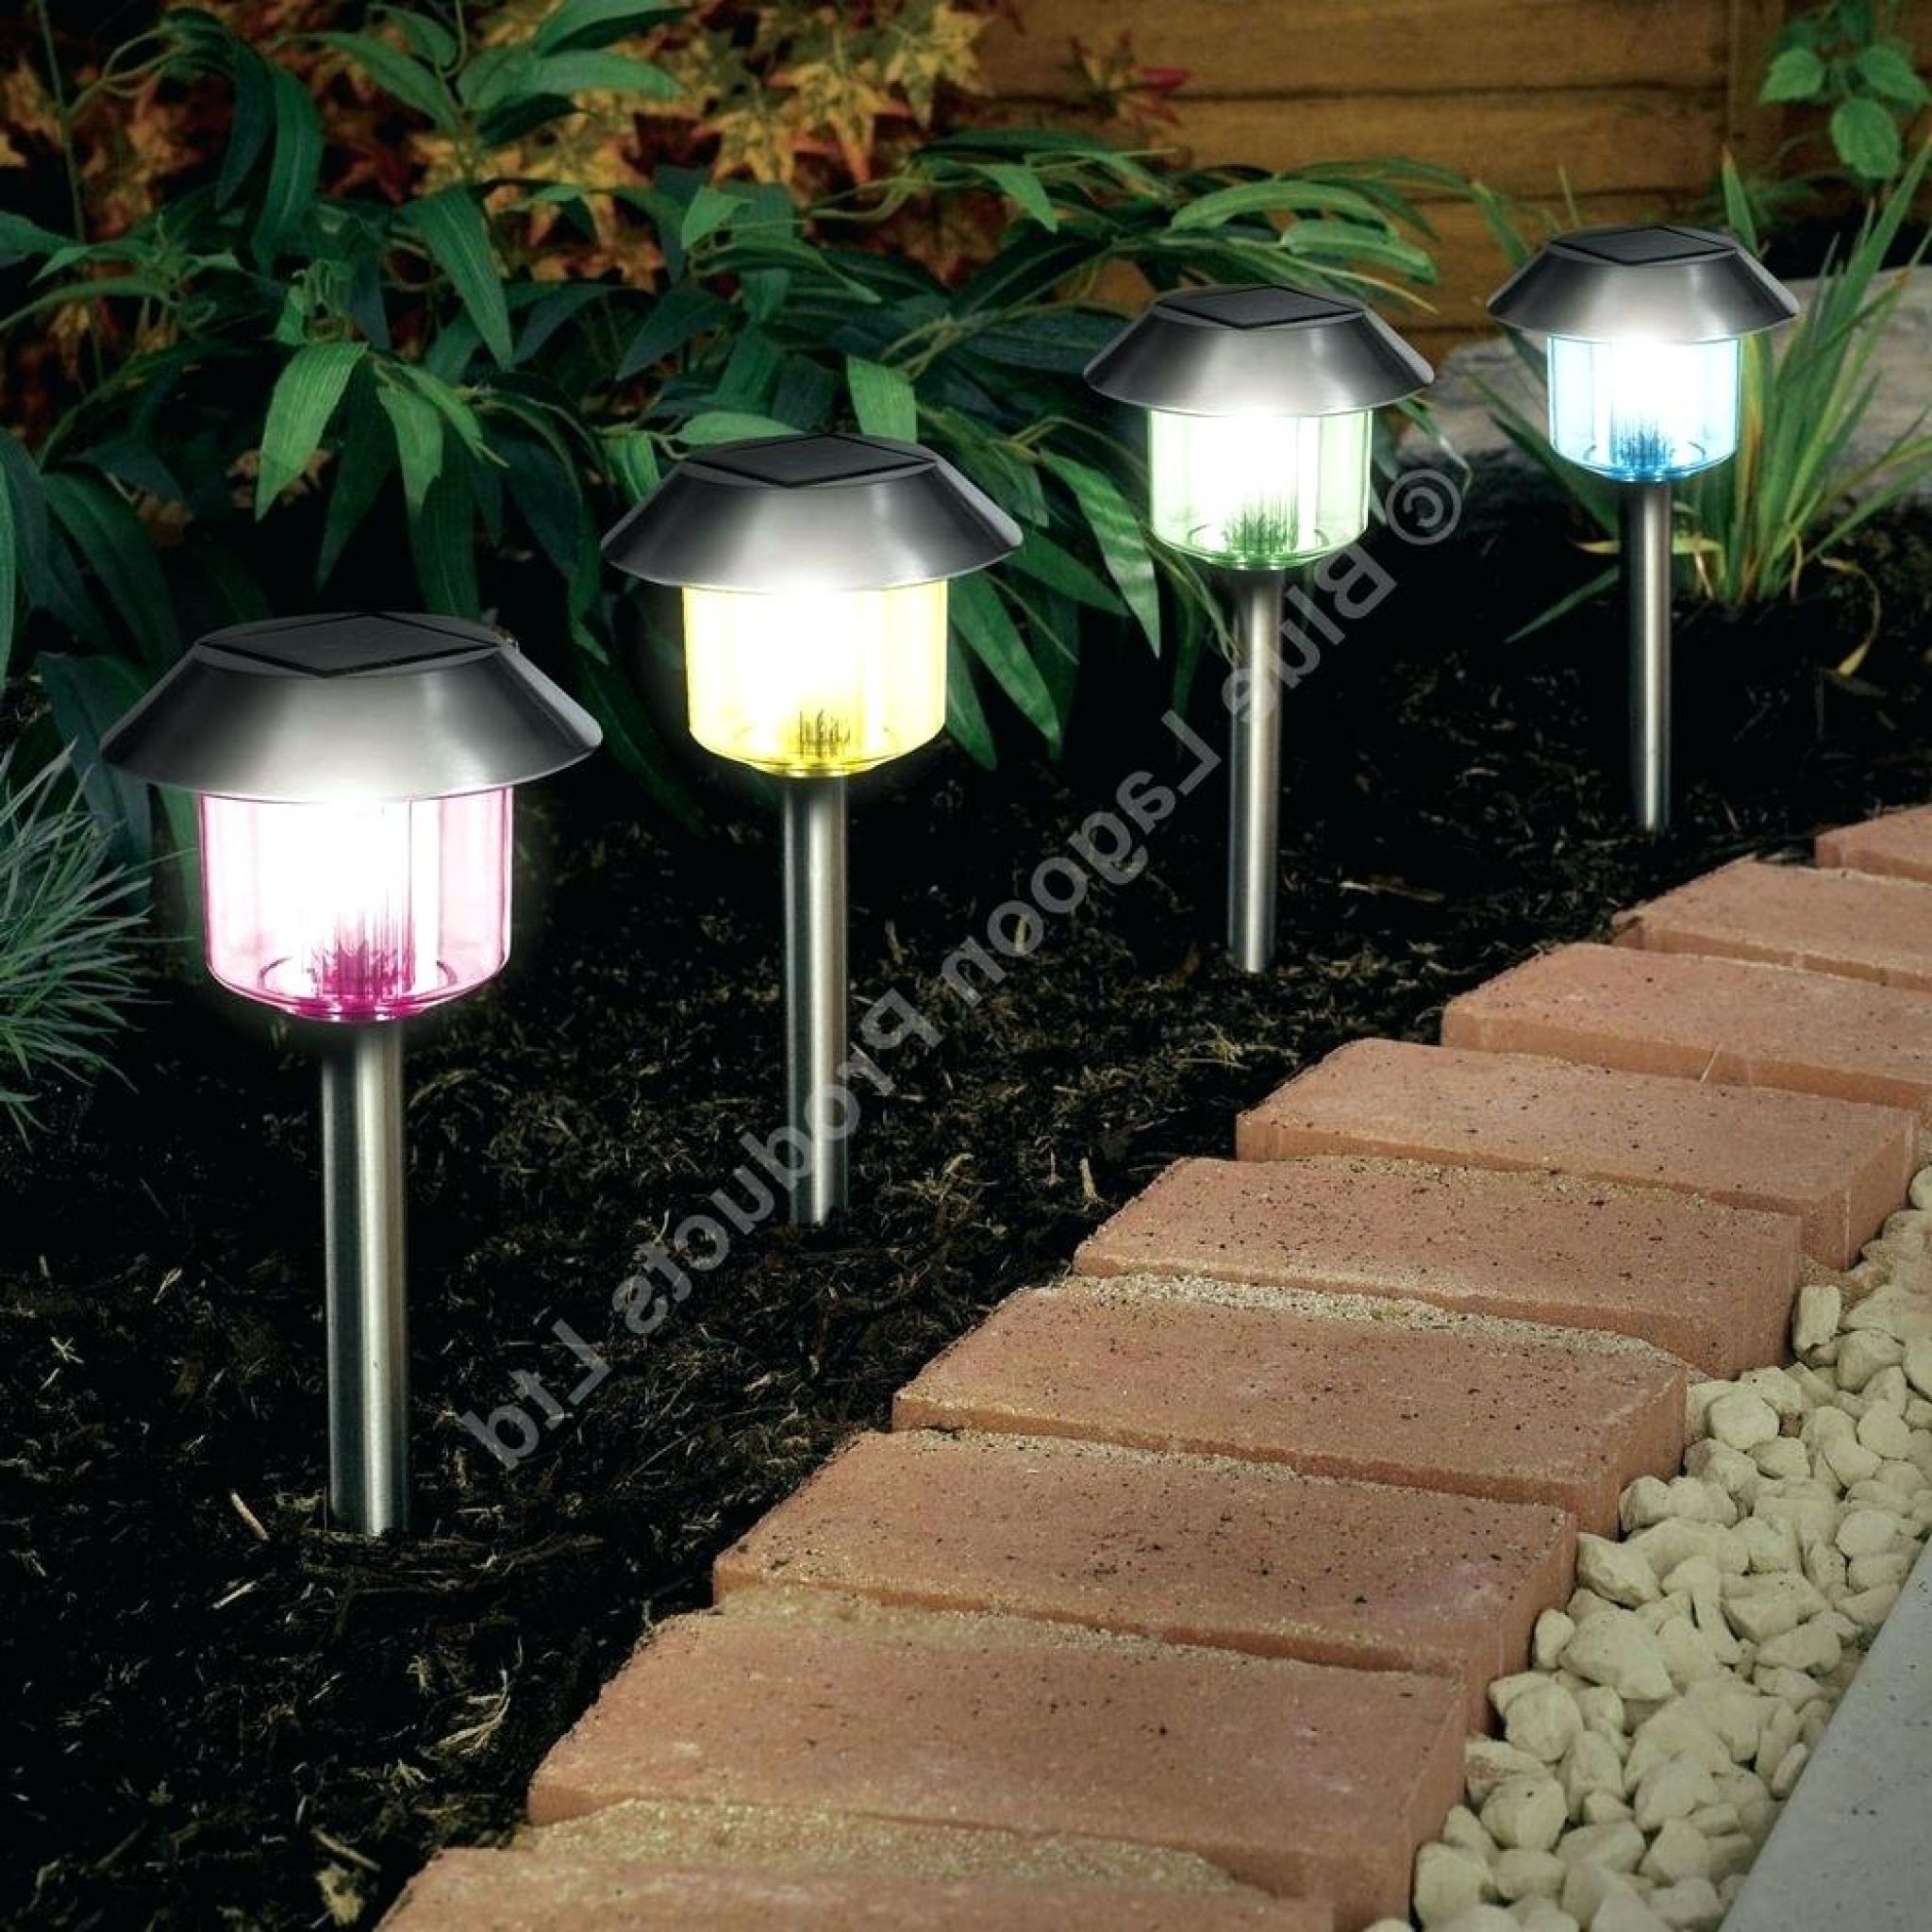 Solar Powered Lamp Post: A Convenient and Eco-Friendly Lighting Solution